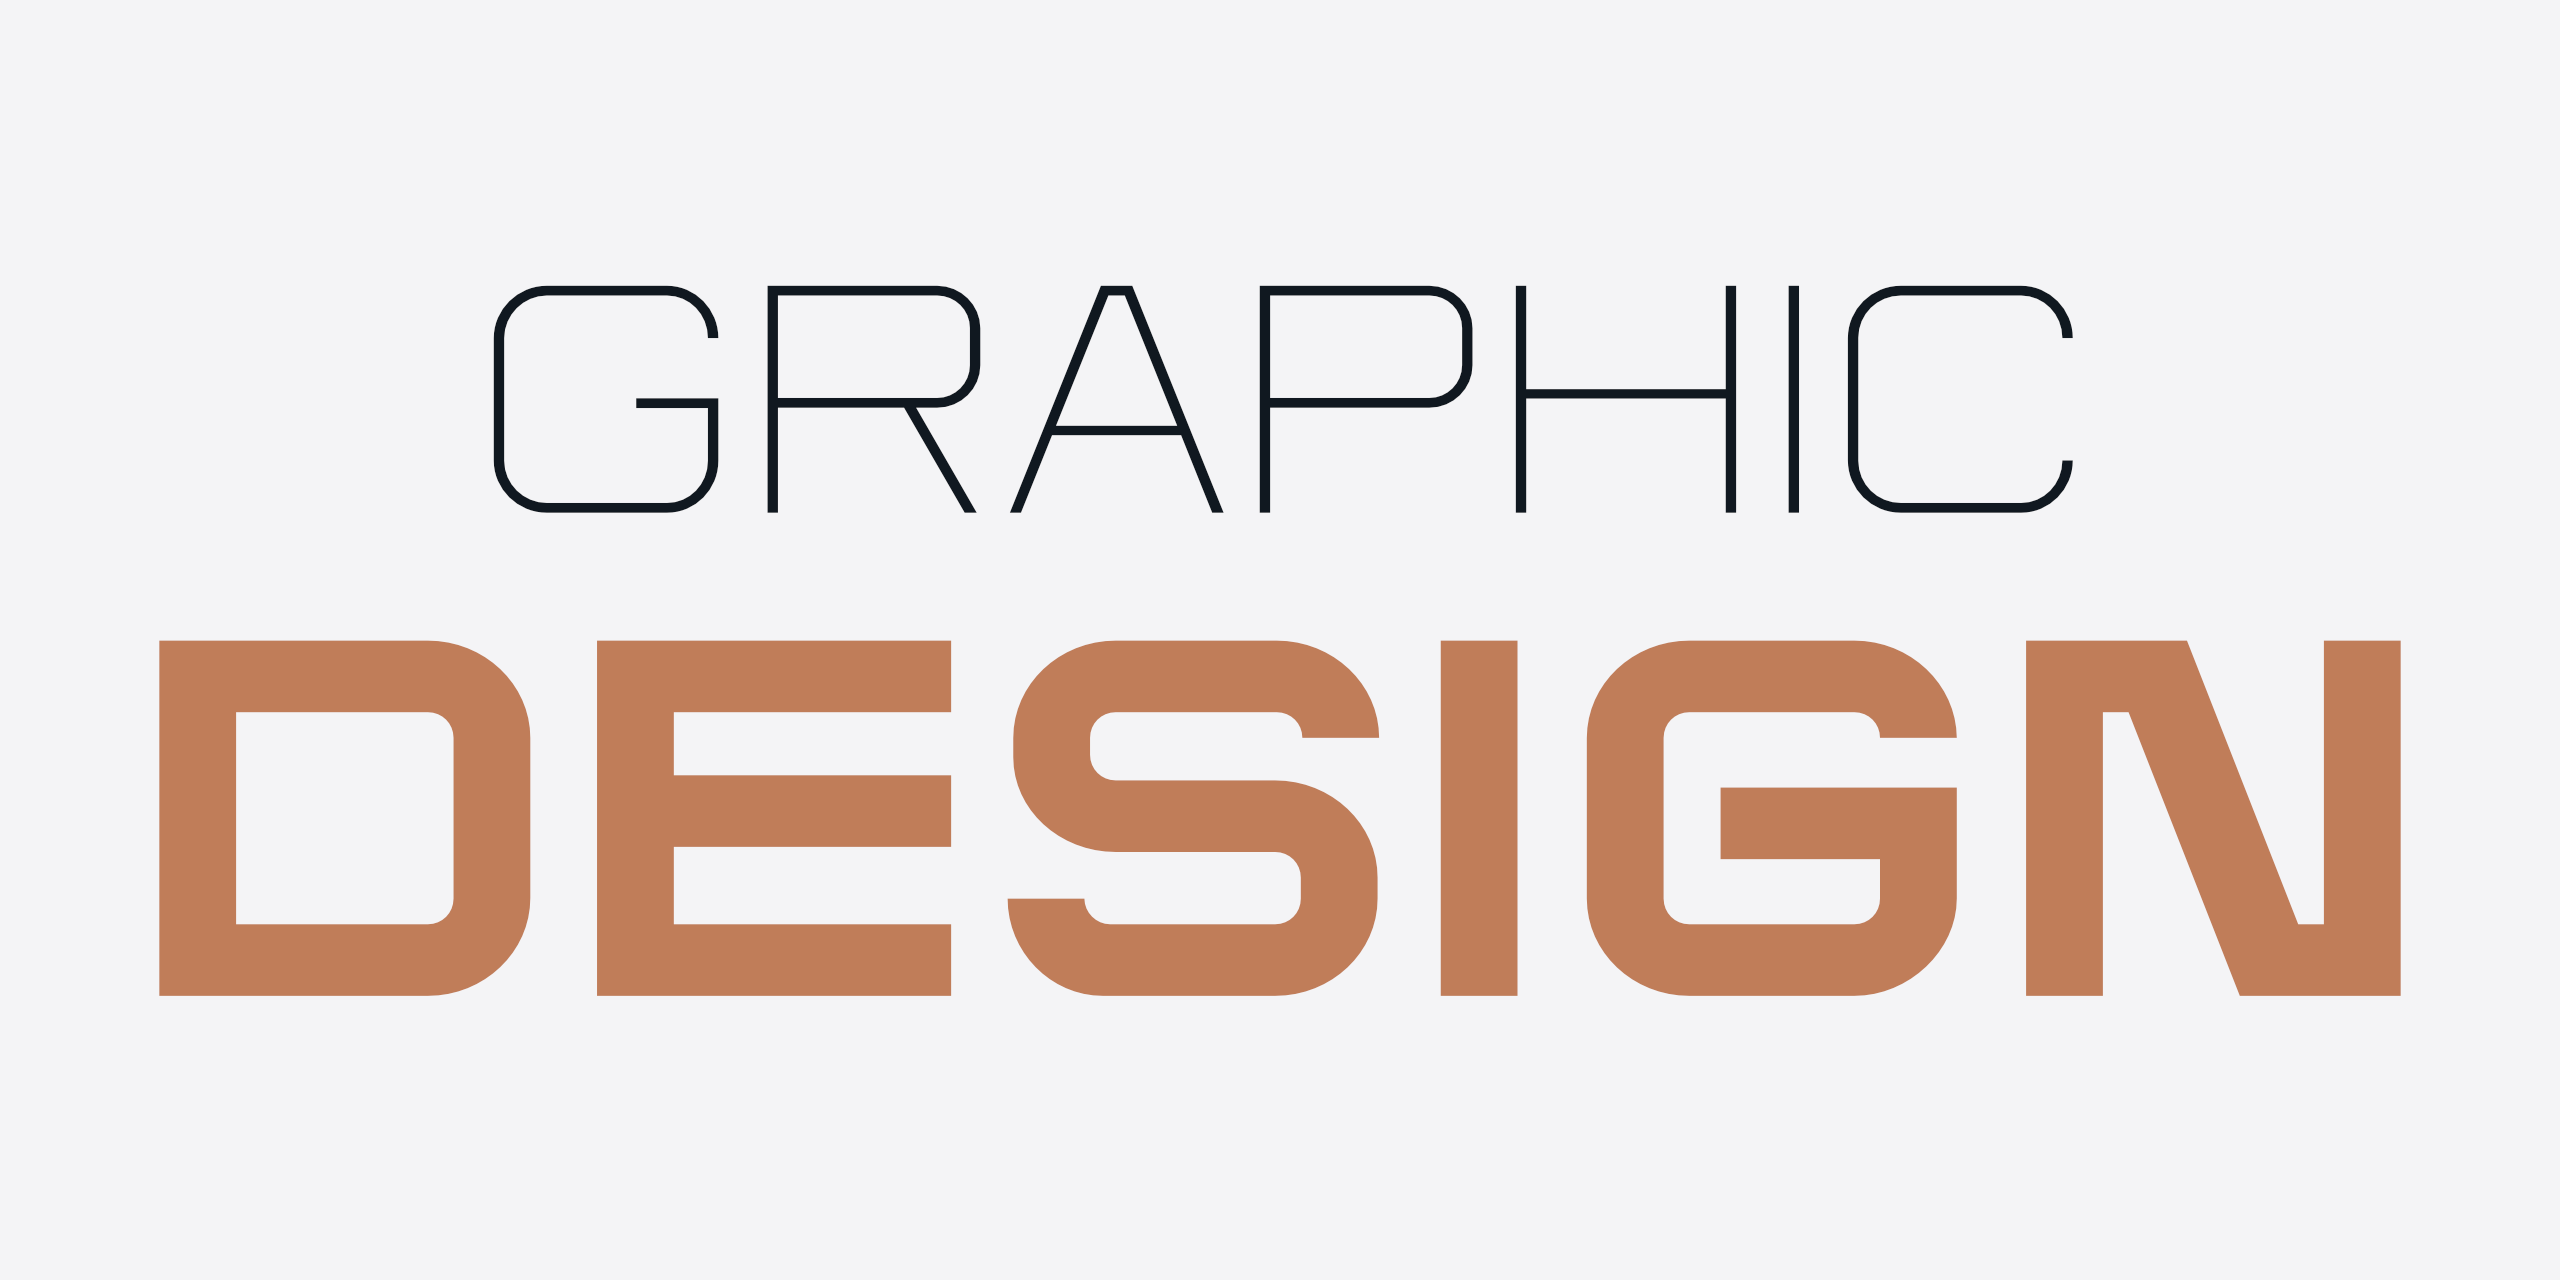 Typography and graphic design with wide typeface.